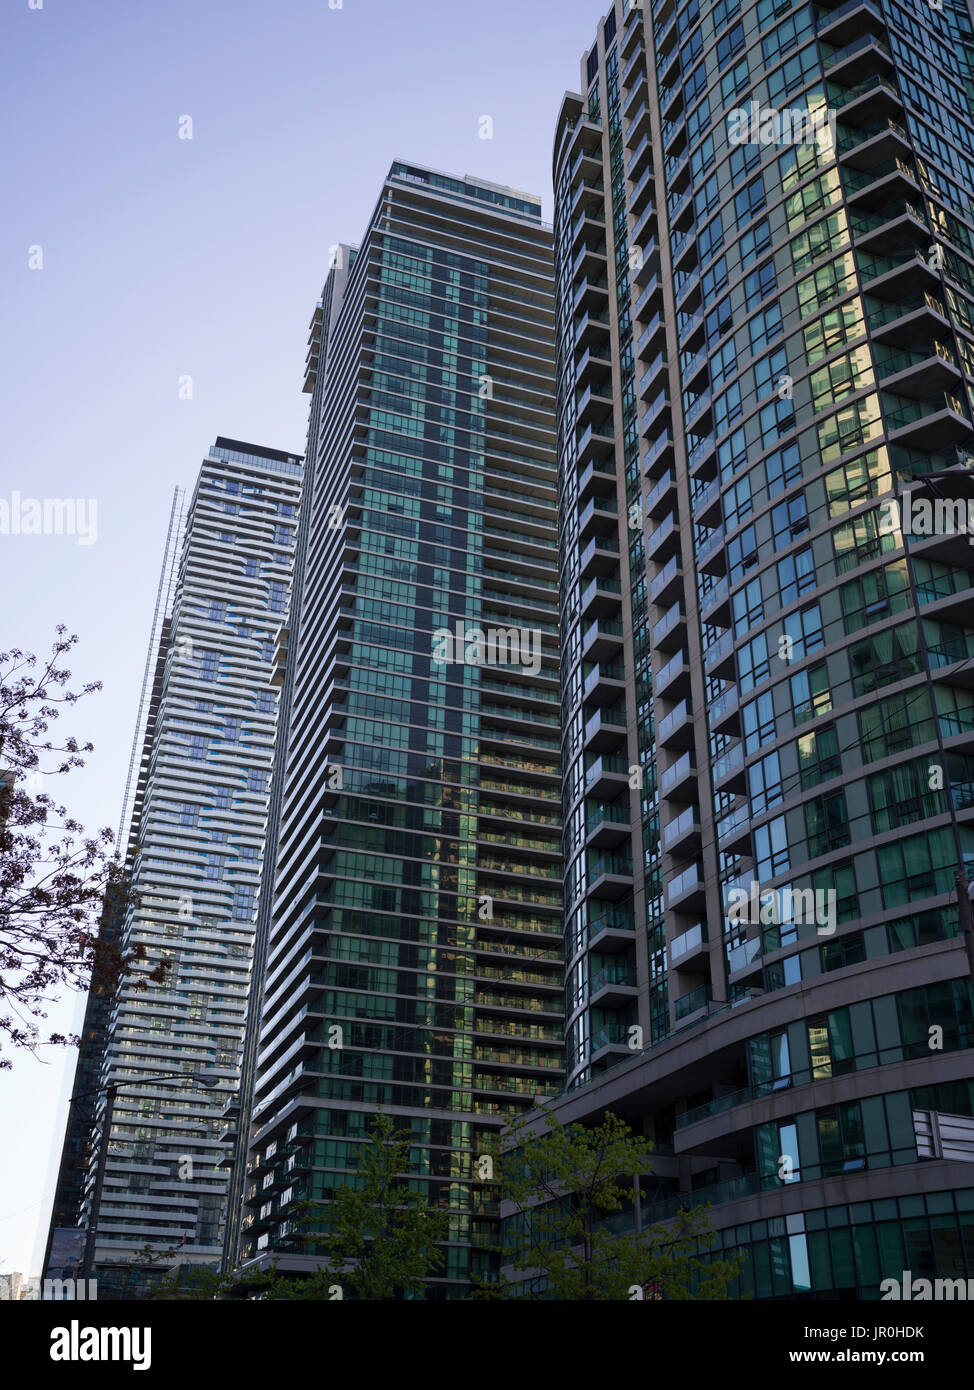 Low Angle View Of Condominium Tower In A Row Against A Blue Sky; Toronto, Ontario, Canada Stock Photo